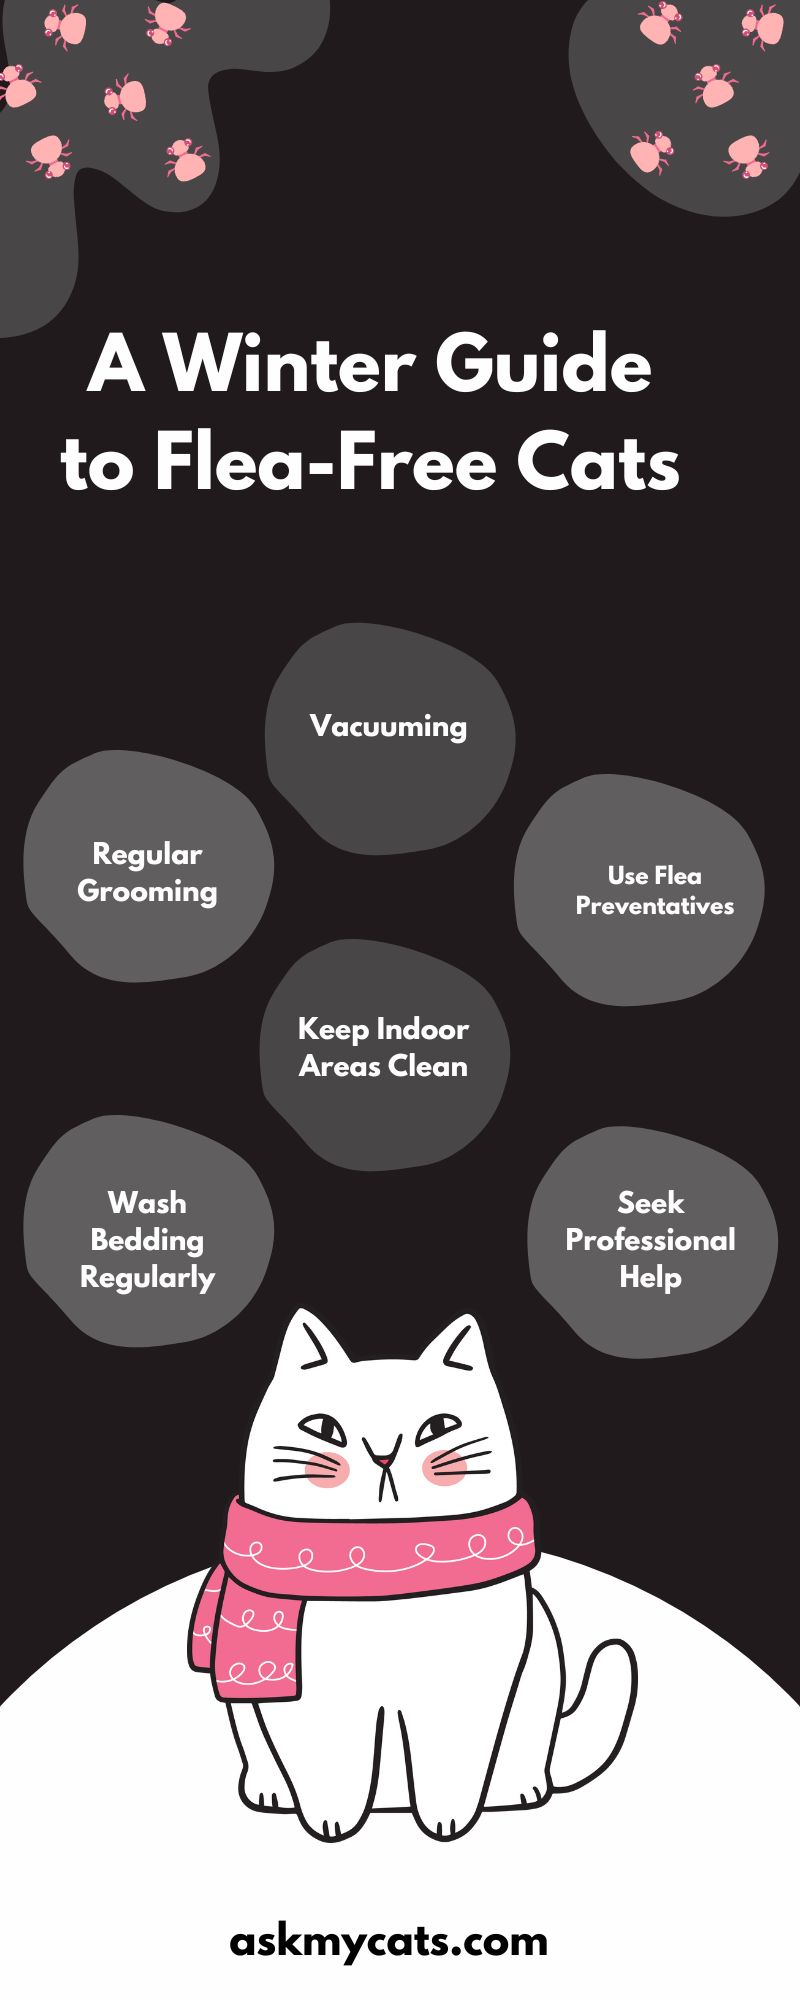 A Winter Guide to Flea-Free Cats (Infographic)